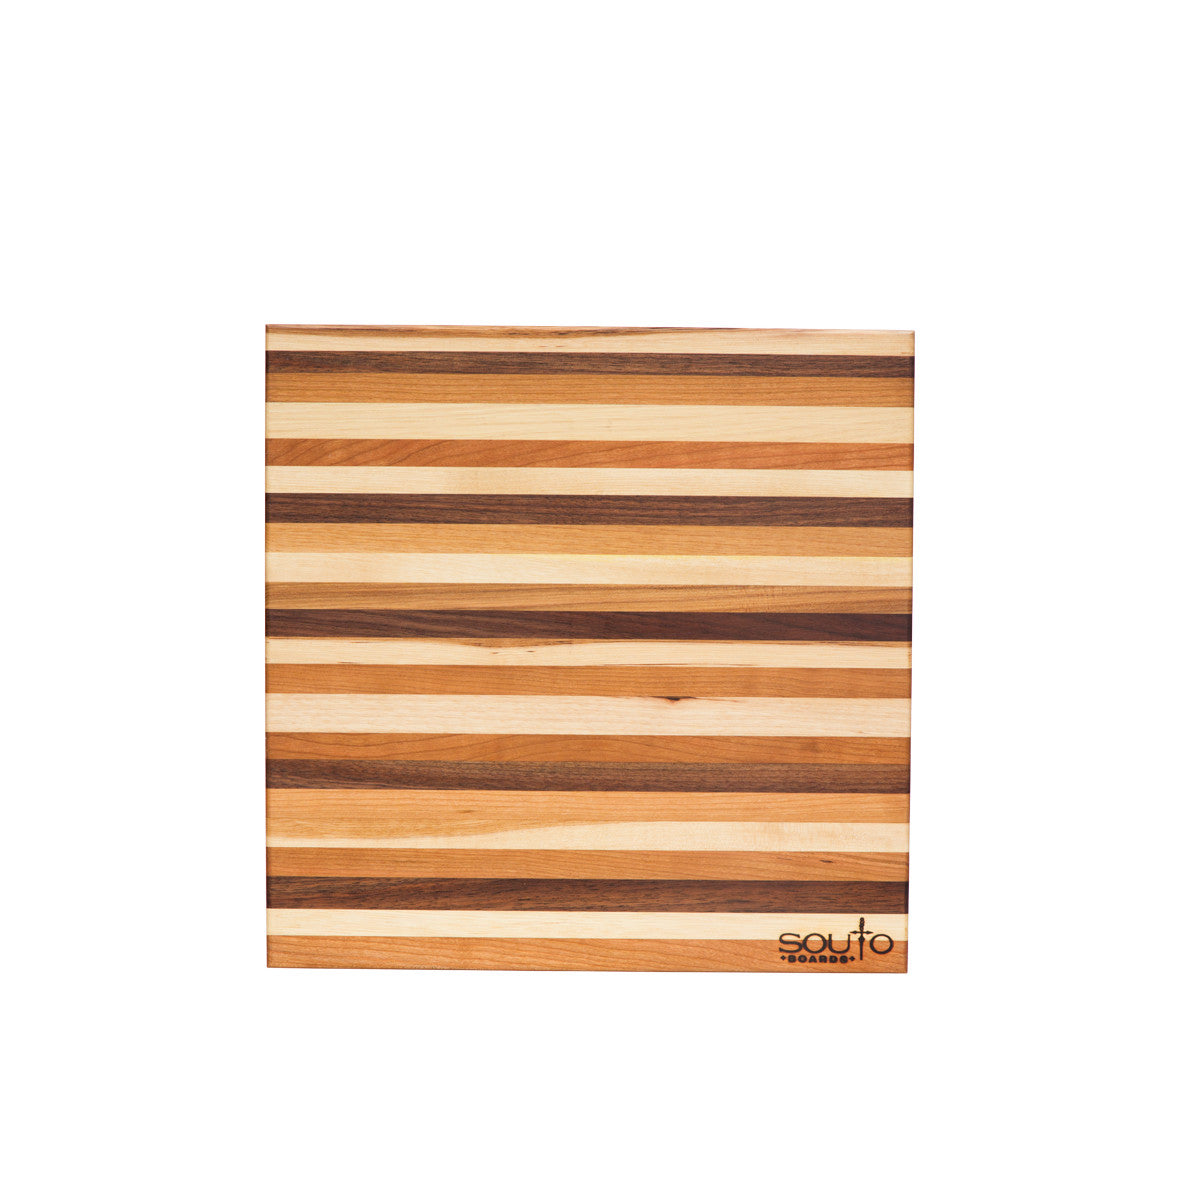 Souto Boards Cutting boards 14" x 14" x 1 - perfect for every day uses